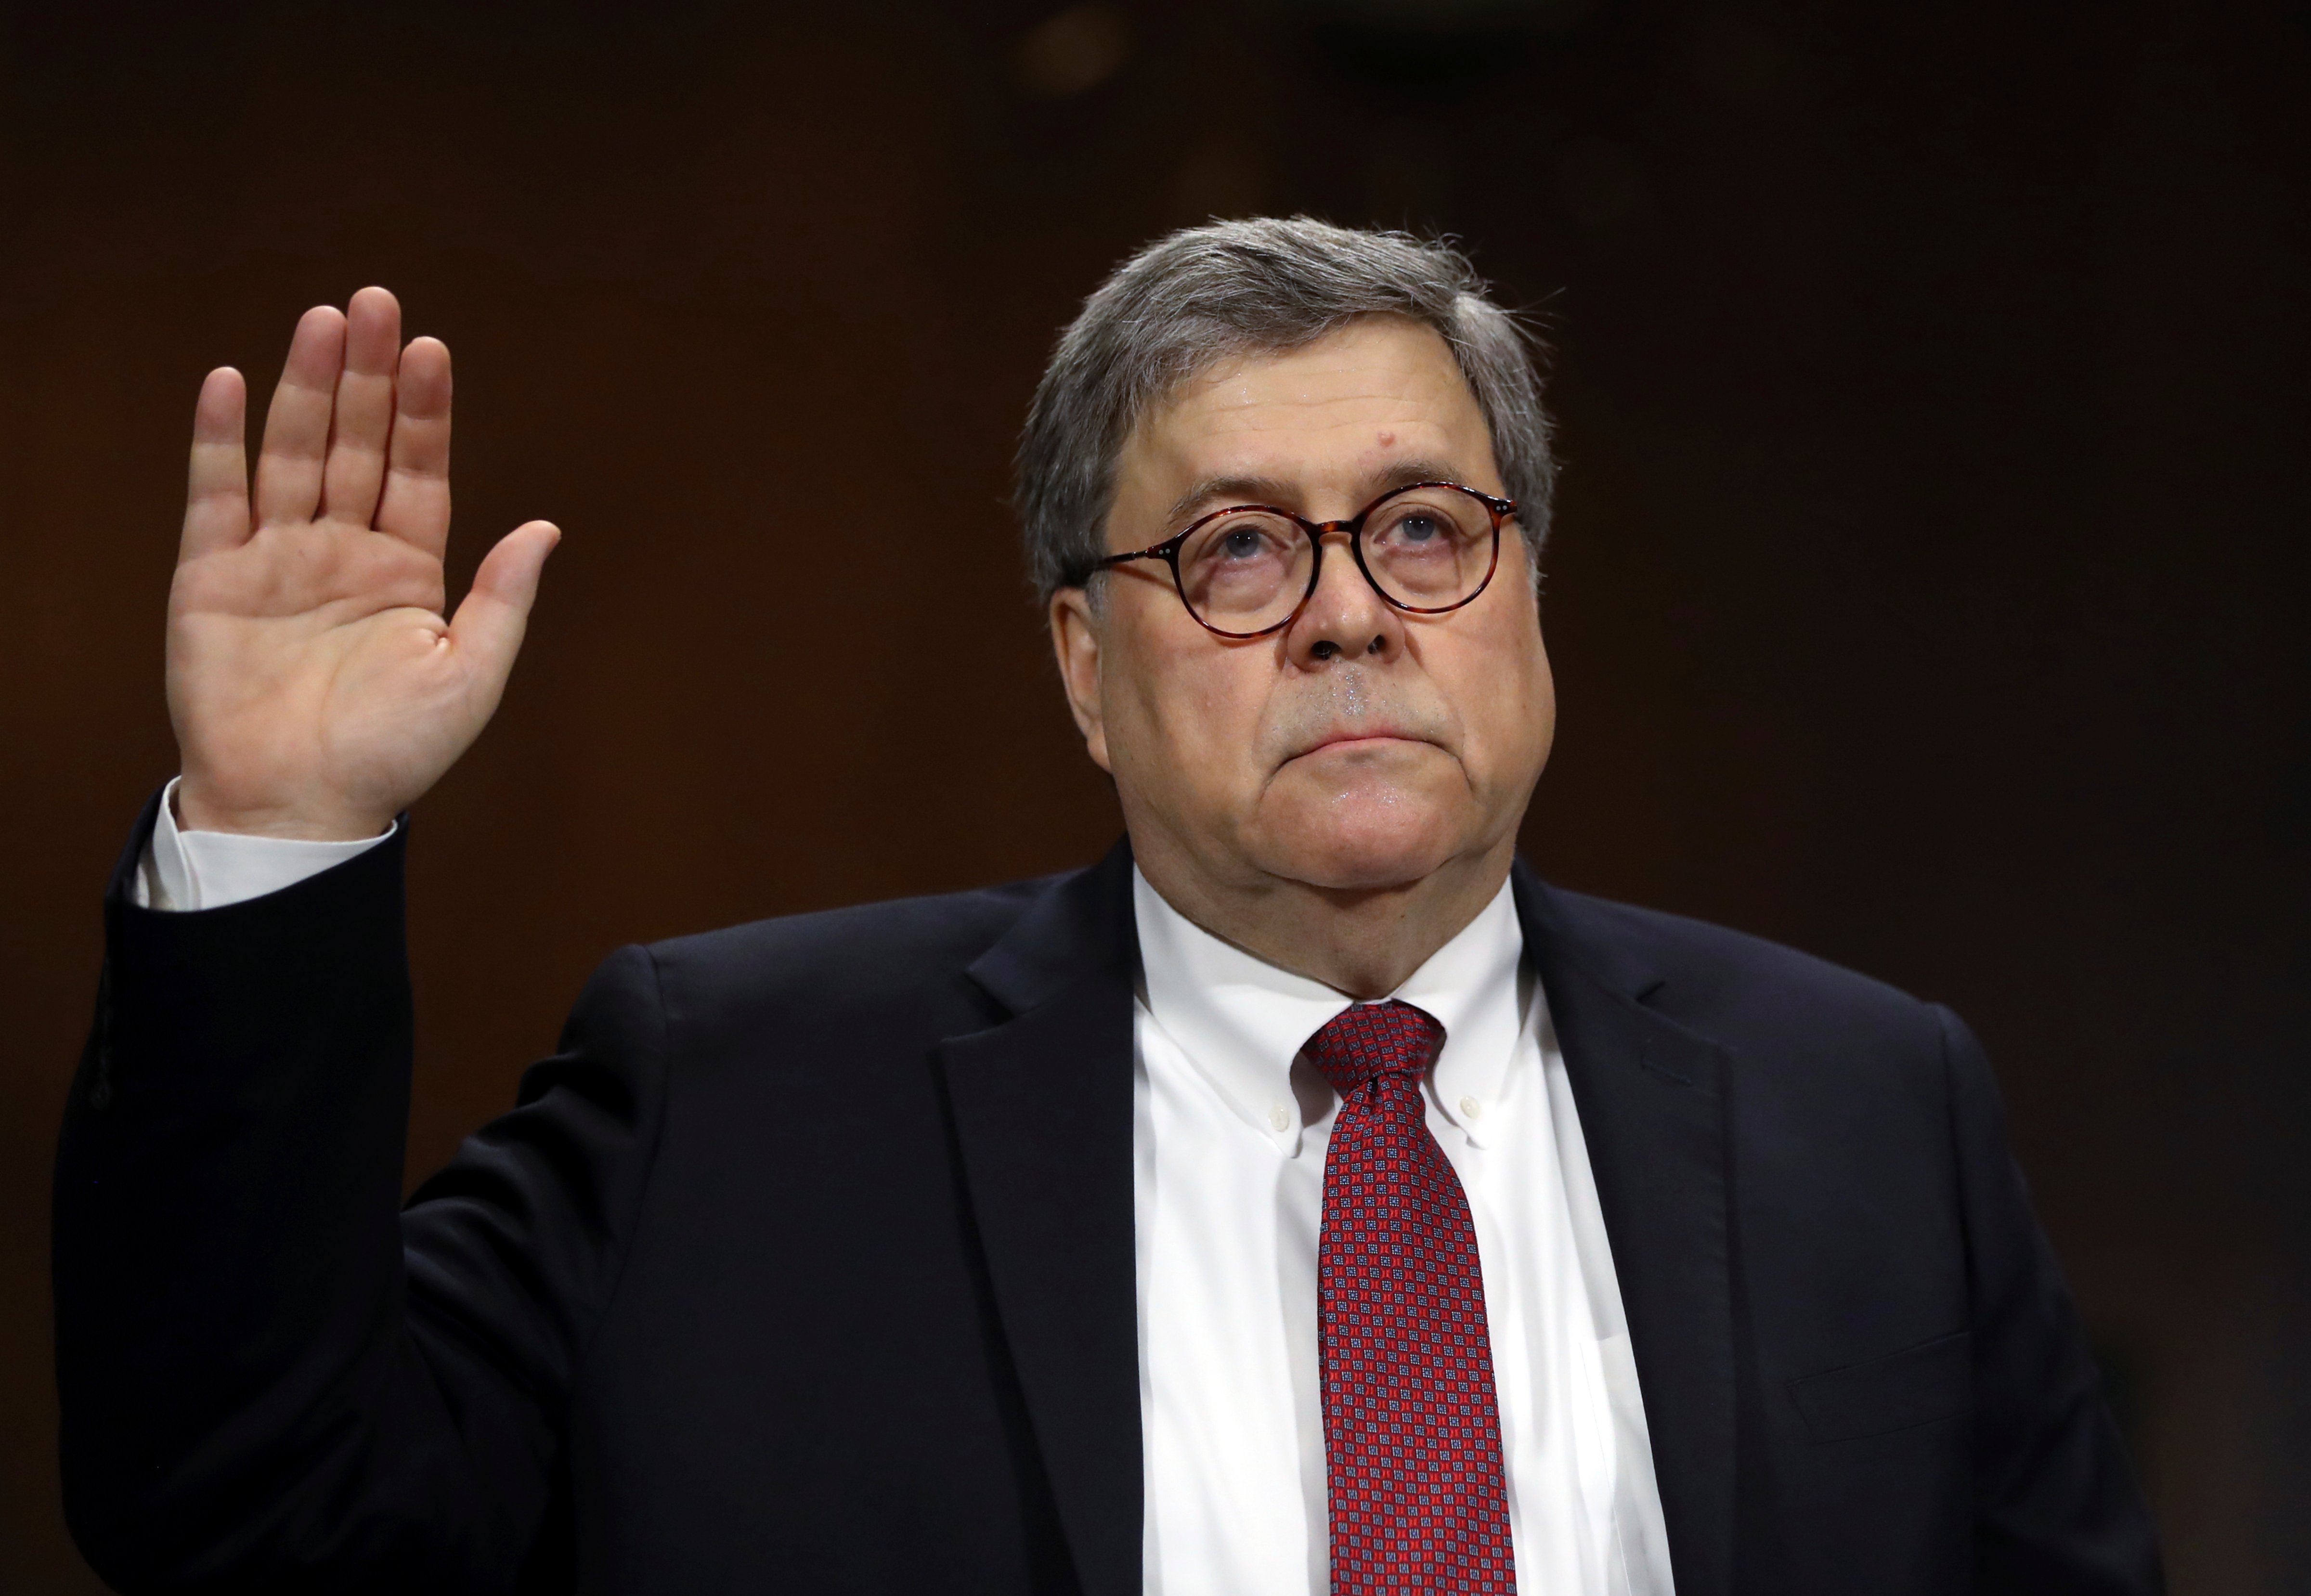 In this May 1, 2019, file photo, Attorney General William Barr is sworn in to testify before the Senate Judiciary Committee hearing on Capitol Hill in Washington. (Andrew Harnik&mdash;AP)